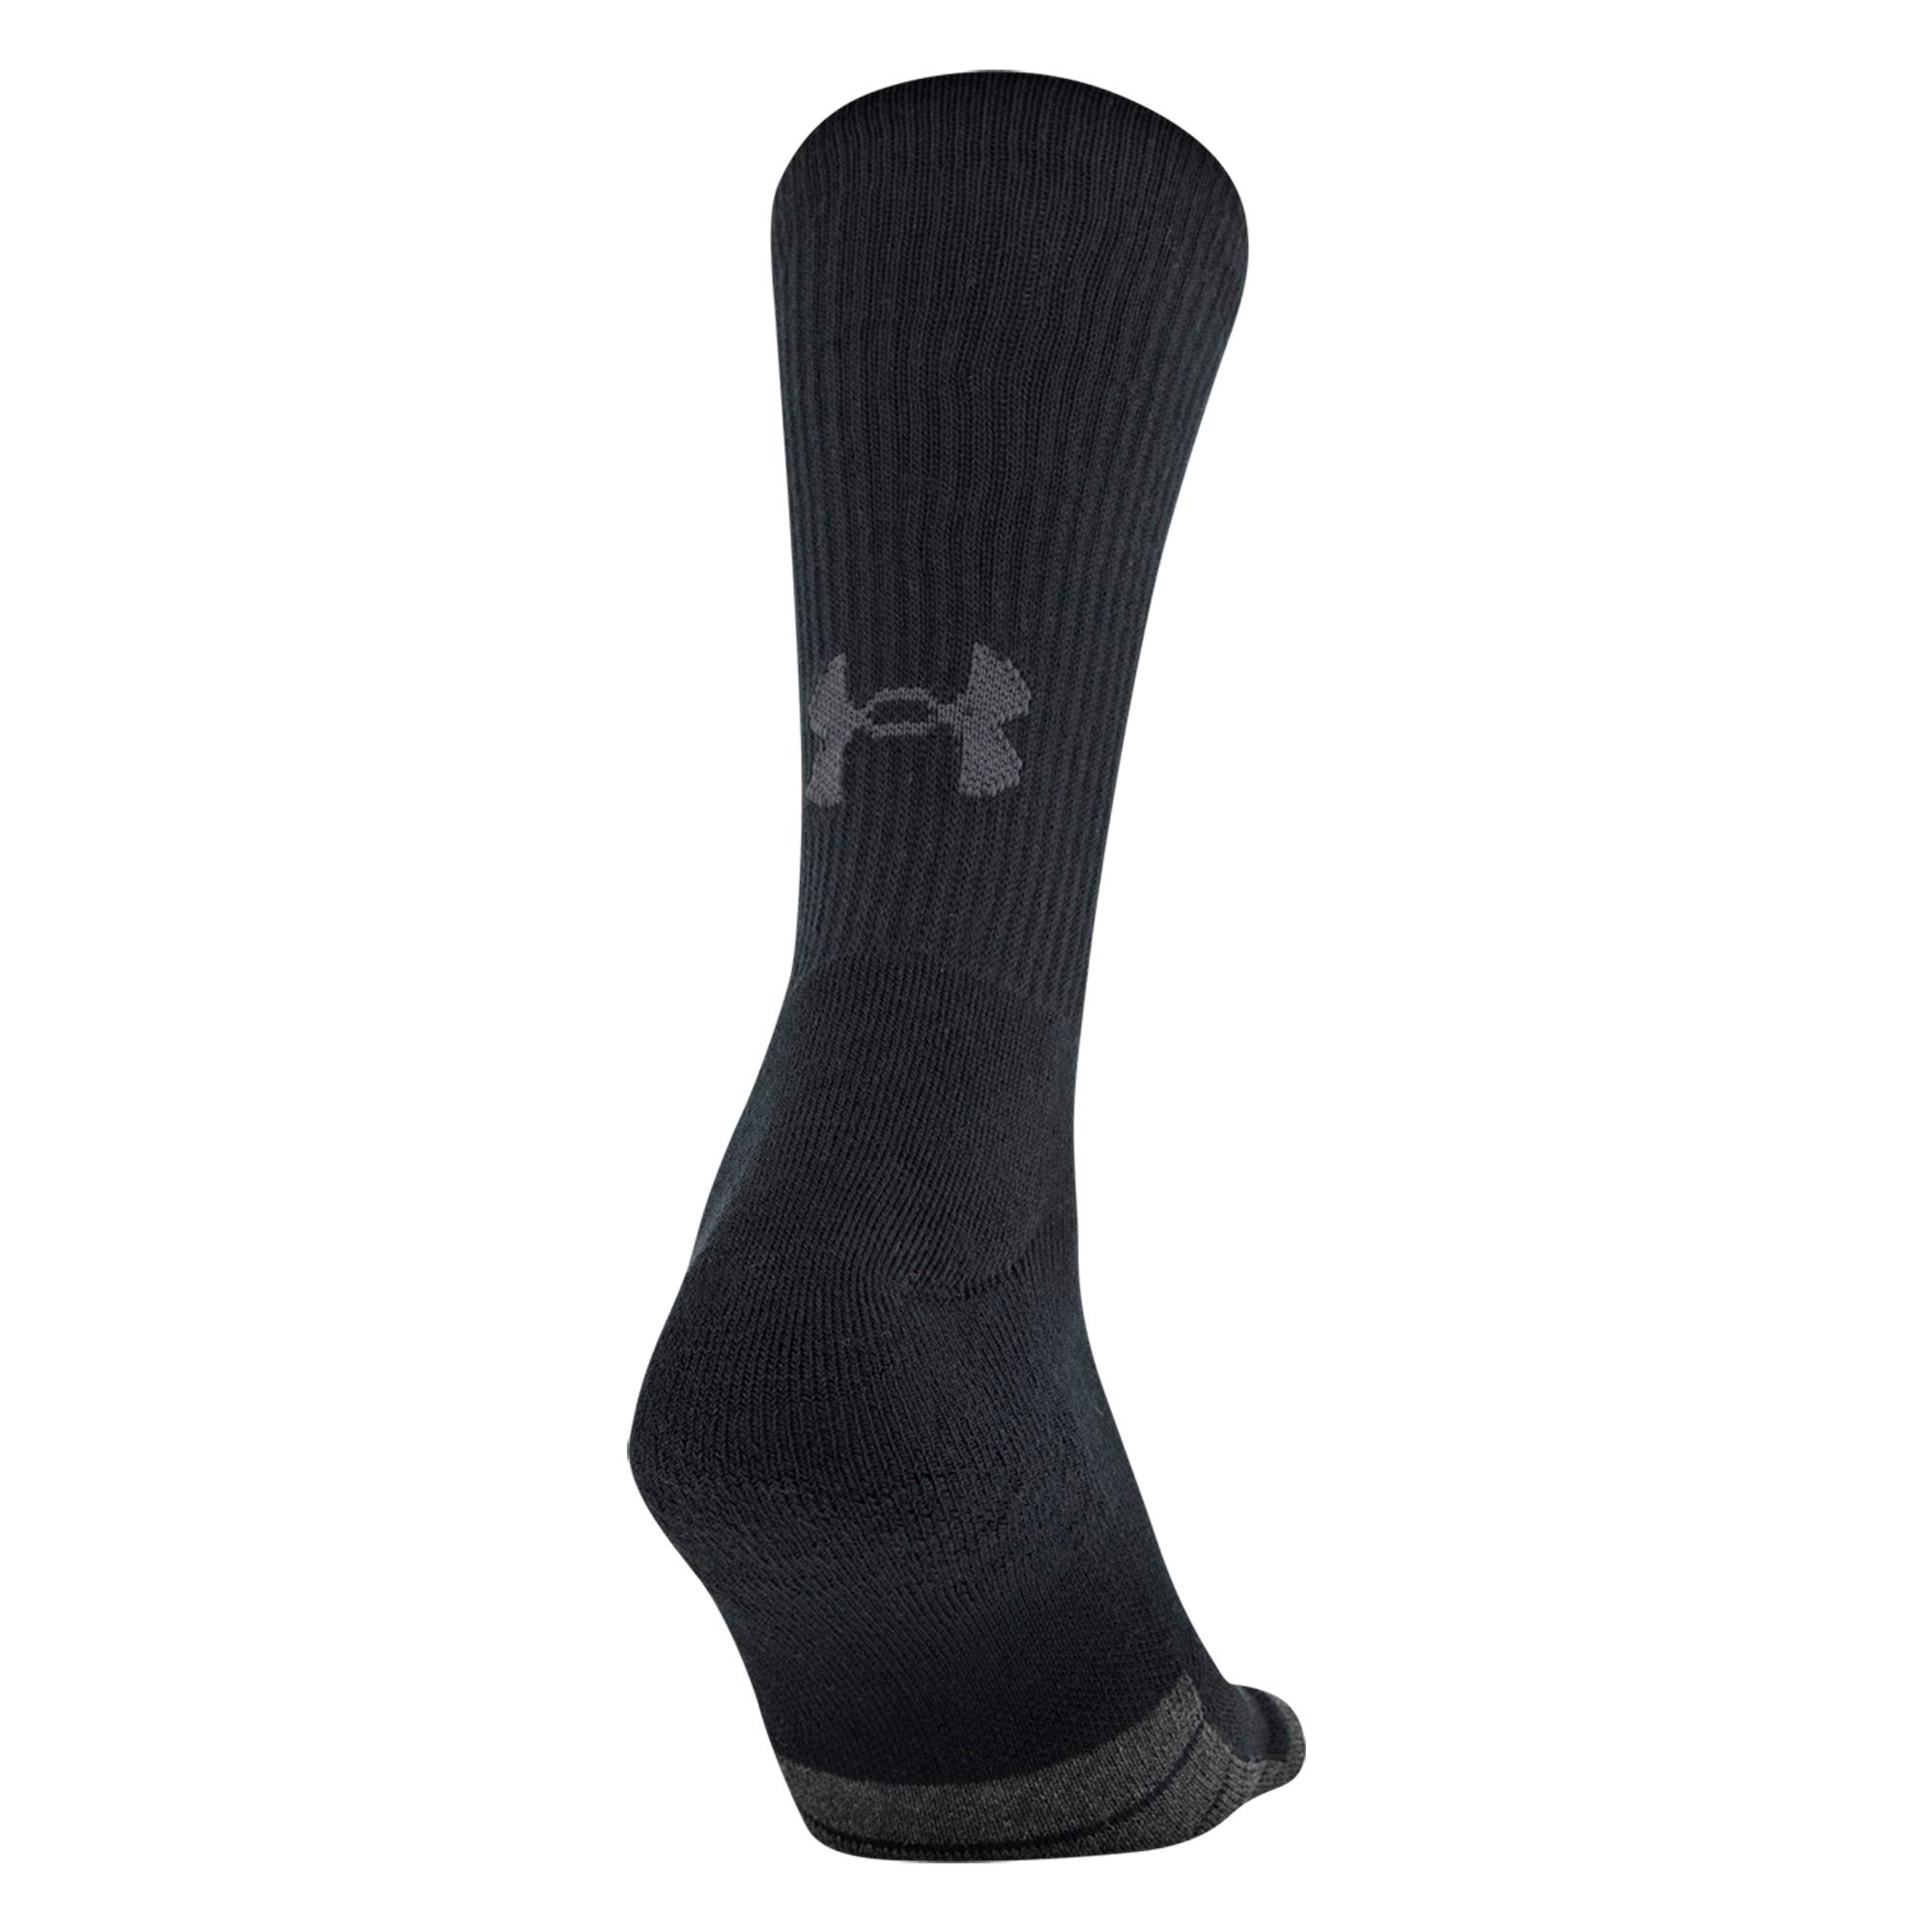 Under Armour Adult Performance Tech Crew Socks, Multipairs